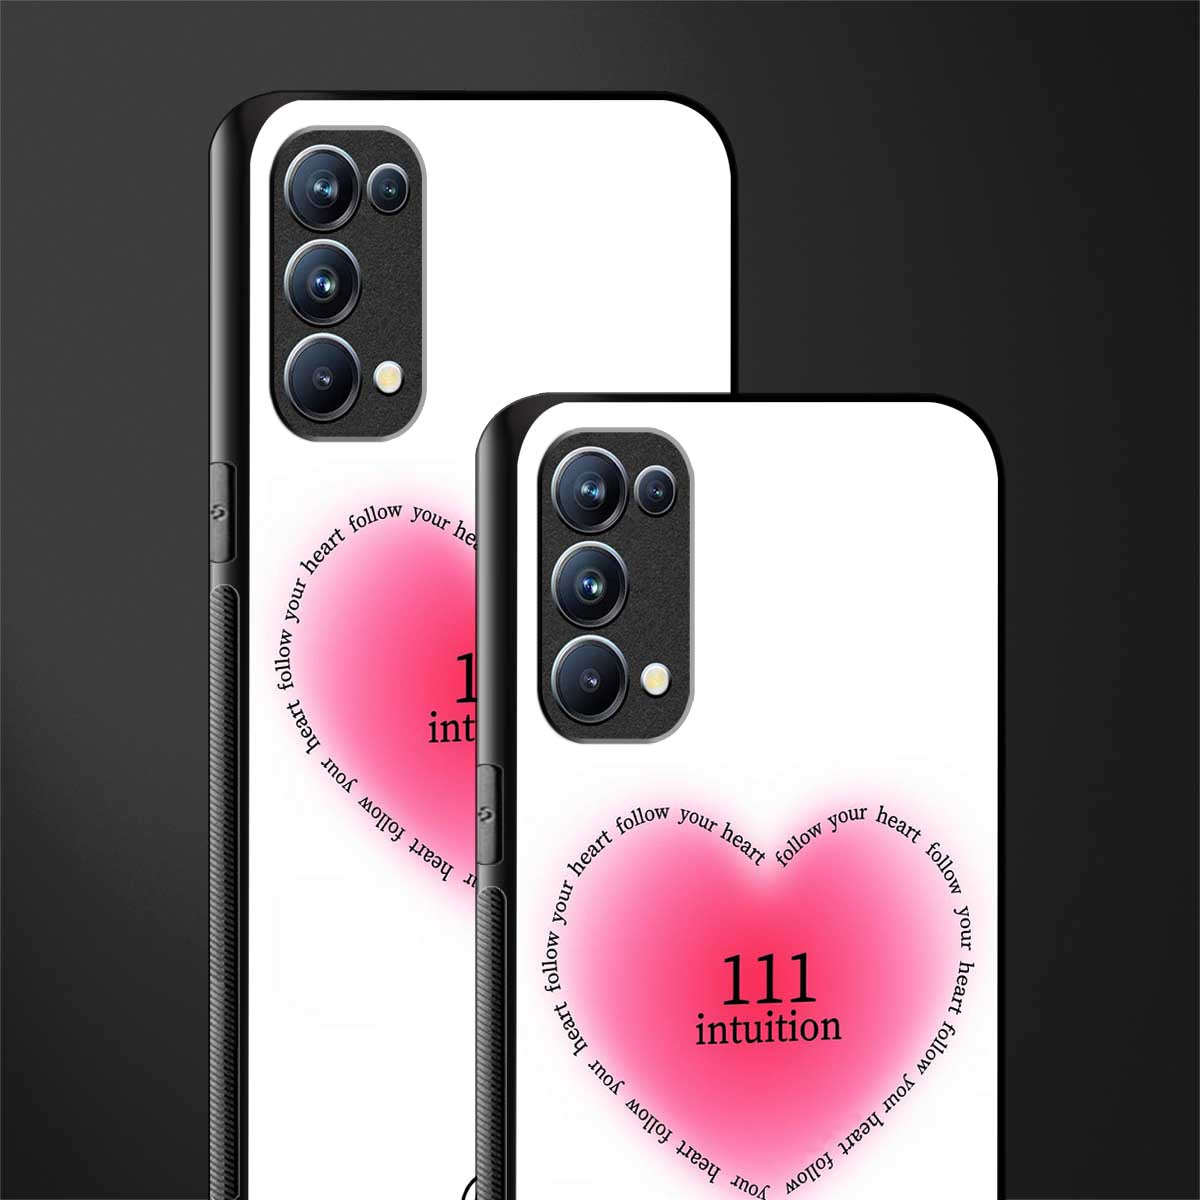 111 intuition glass case for oppo reno 5 pro image-2